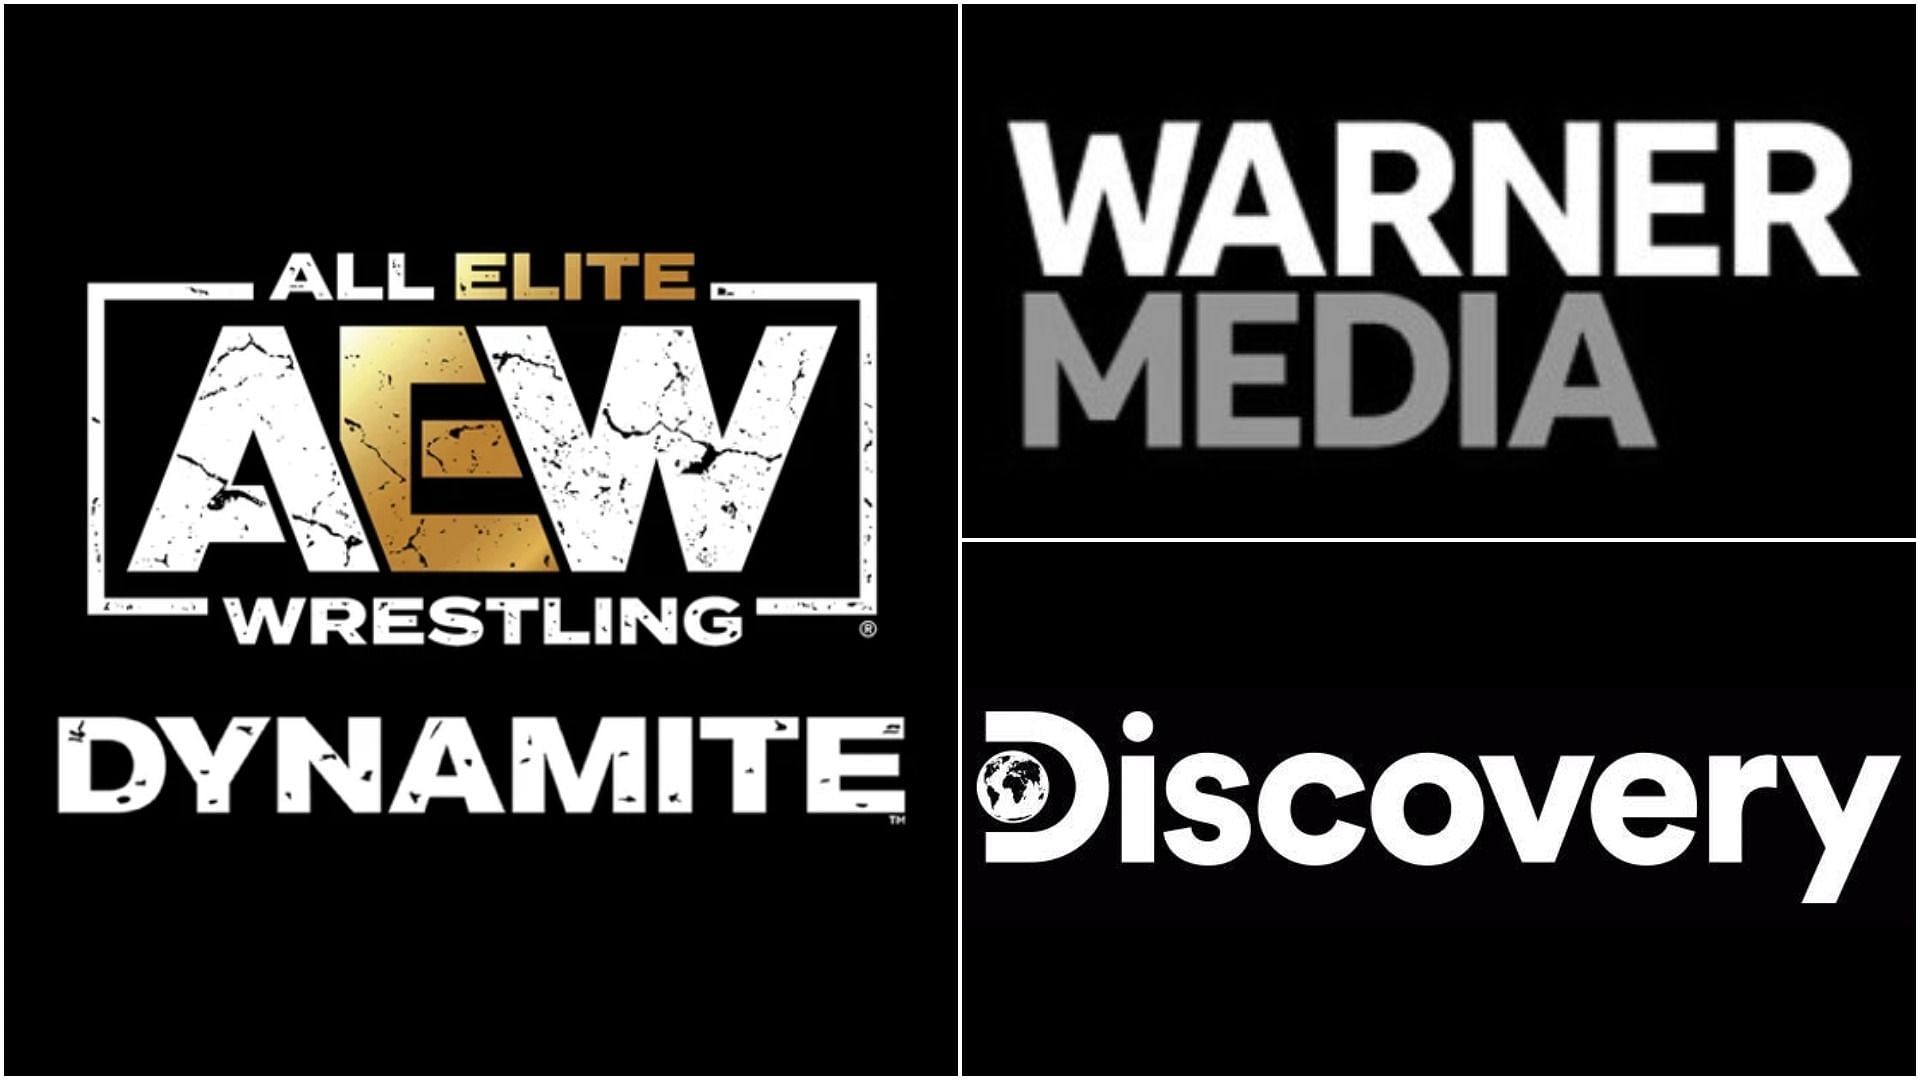 AEW might feel the impact of the WarnerMedia/Discovery merger